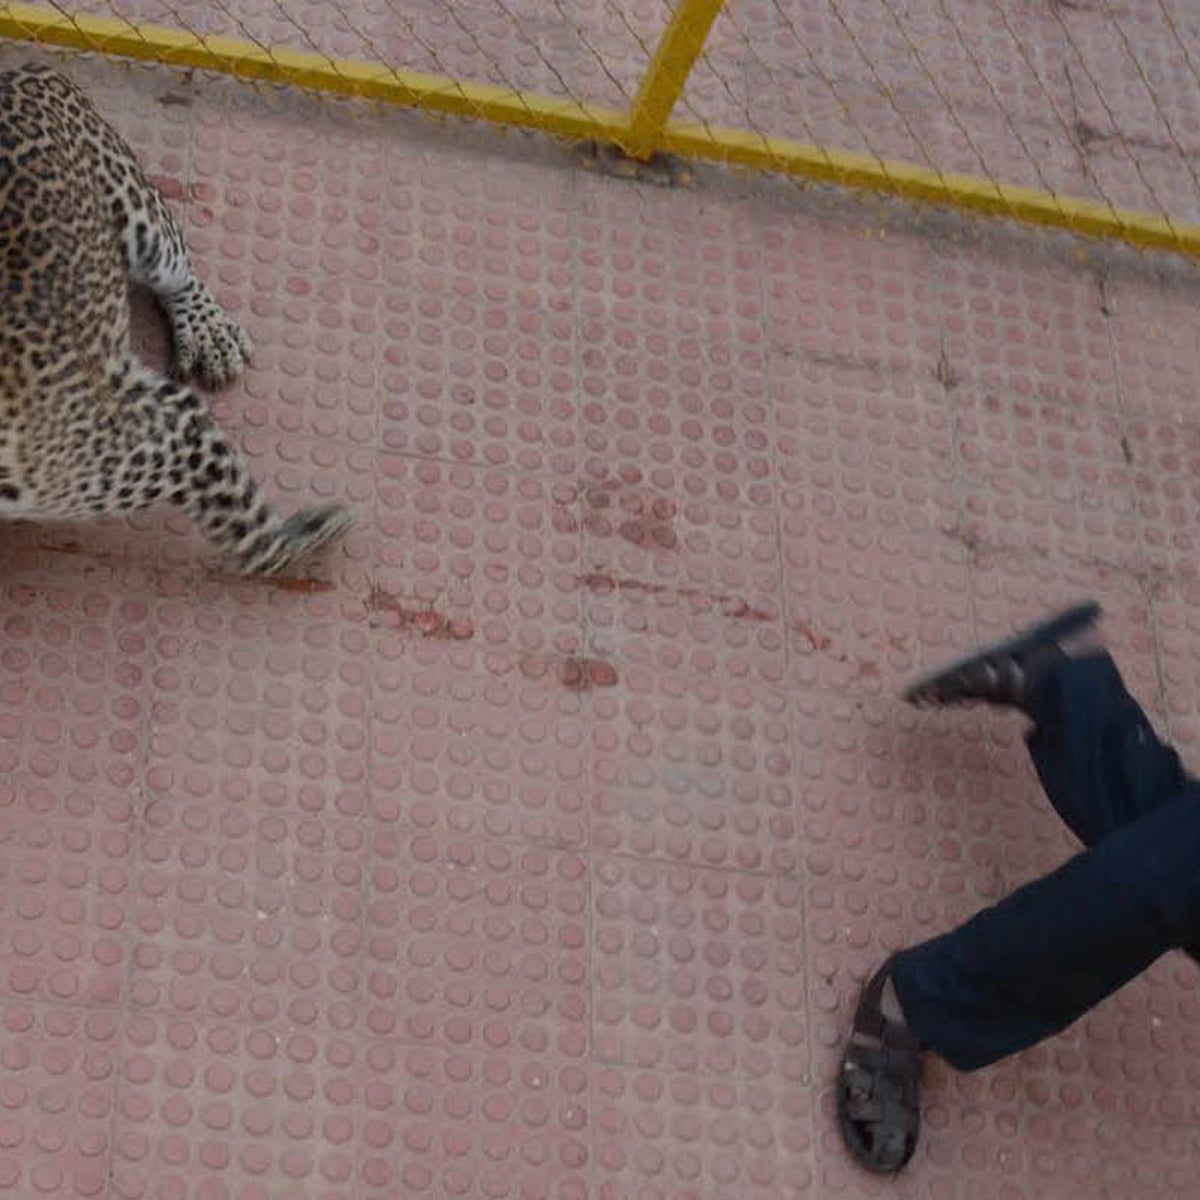 Leopard enters Indian school and injures five people before capture | India  | The Guardian